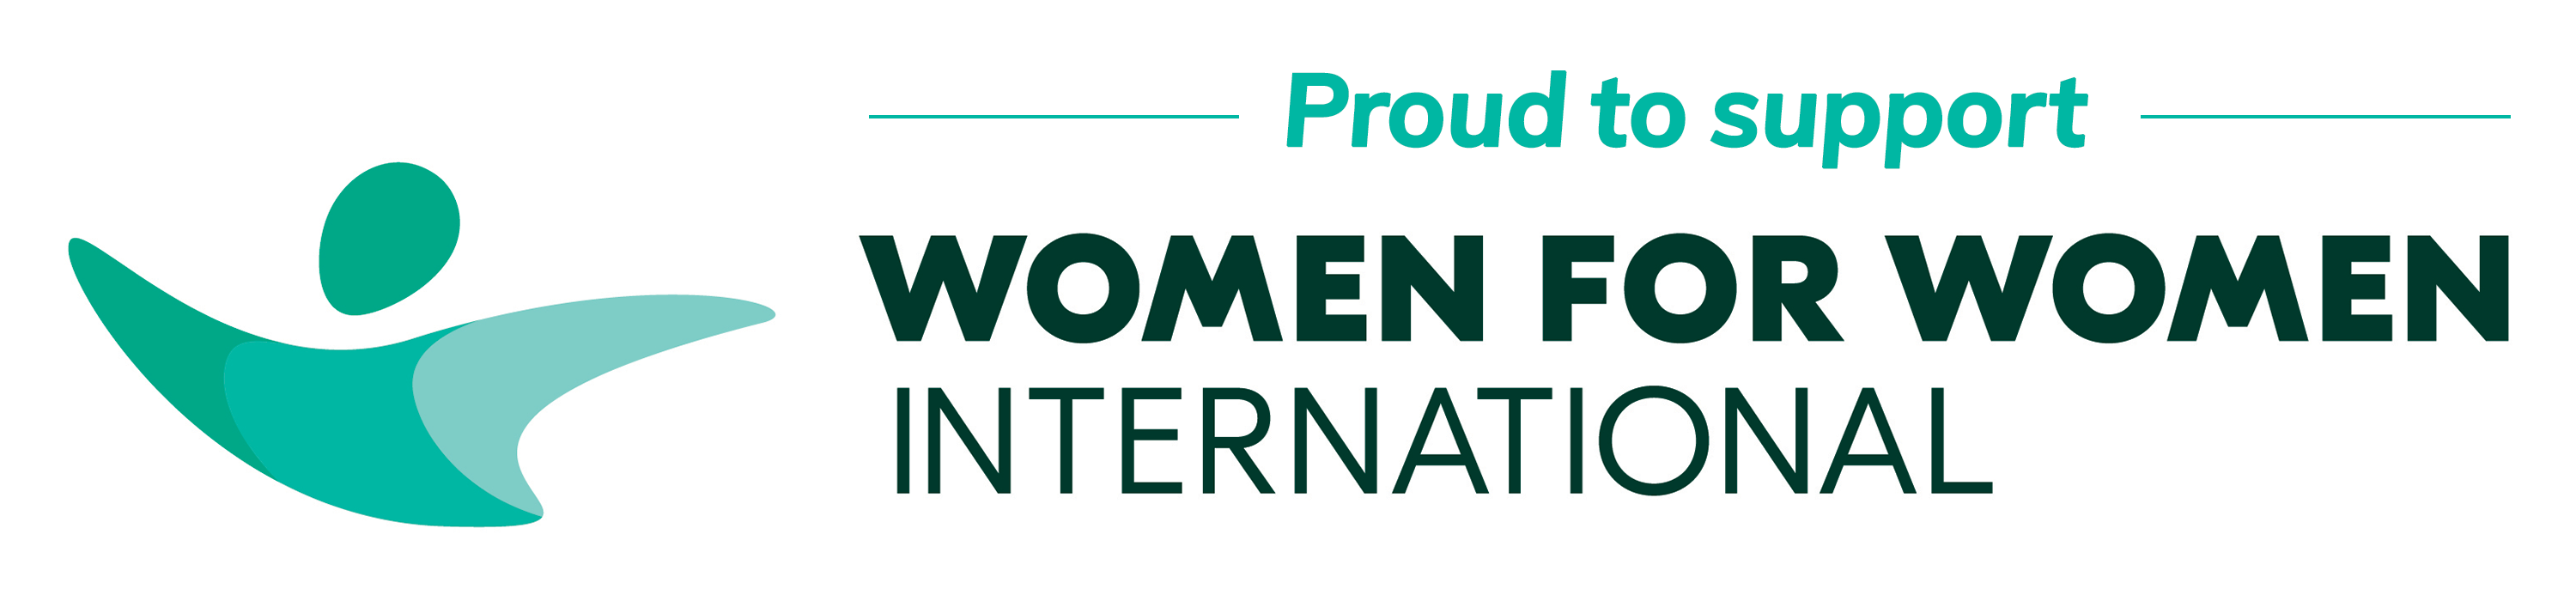 proud to support Women for Women banner